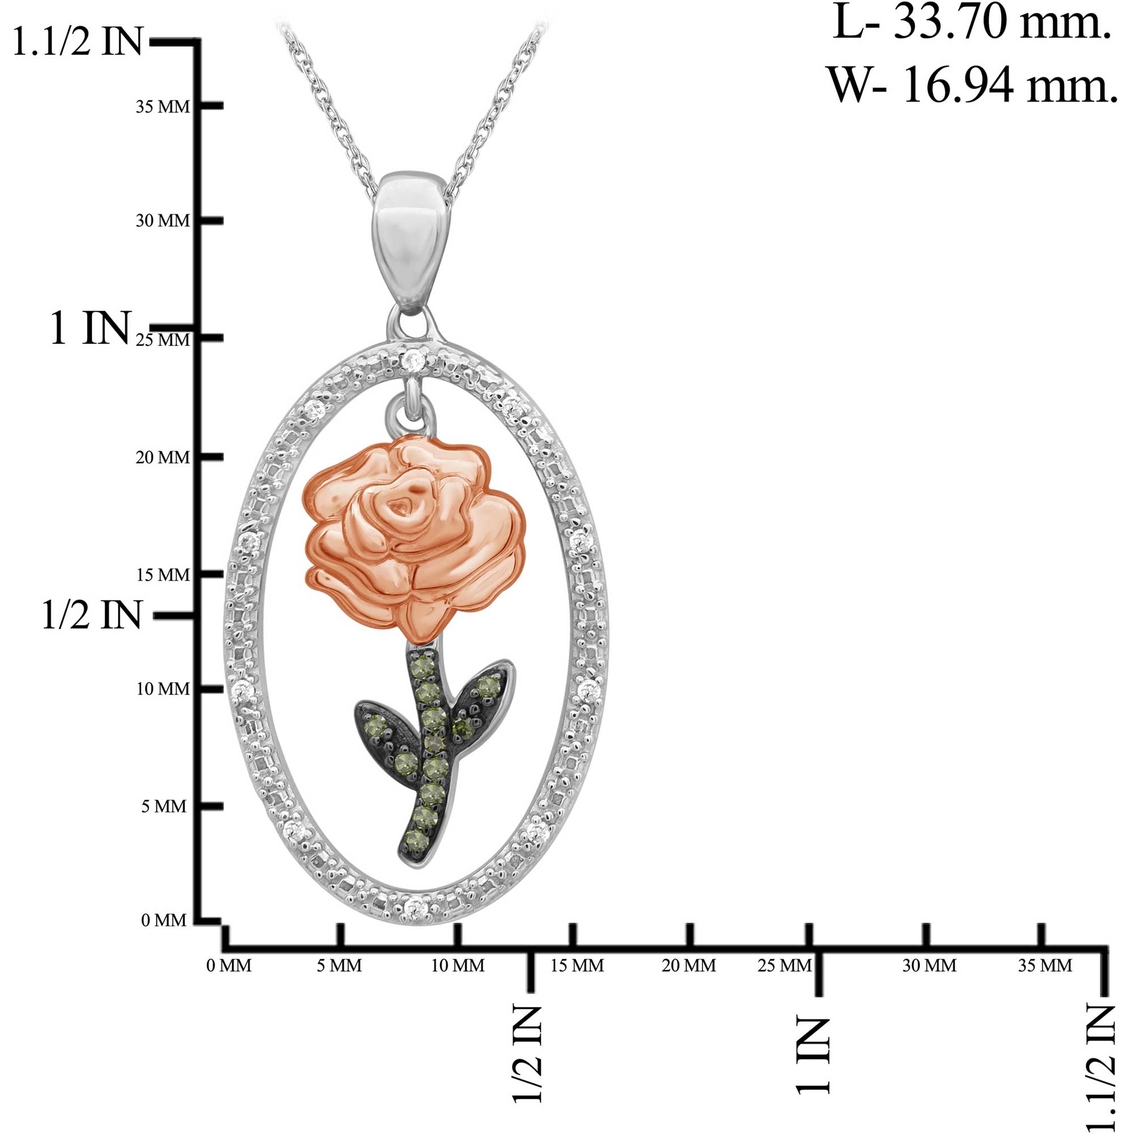 She Shines 14K Gold Over Sterling Silver 1/10 CTW Diamond Dangling Rose Pendant - Image 4 of 4